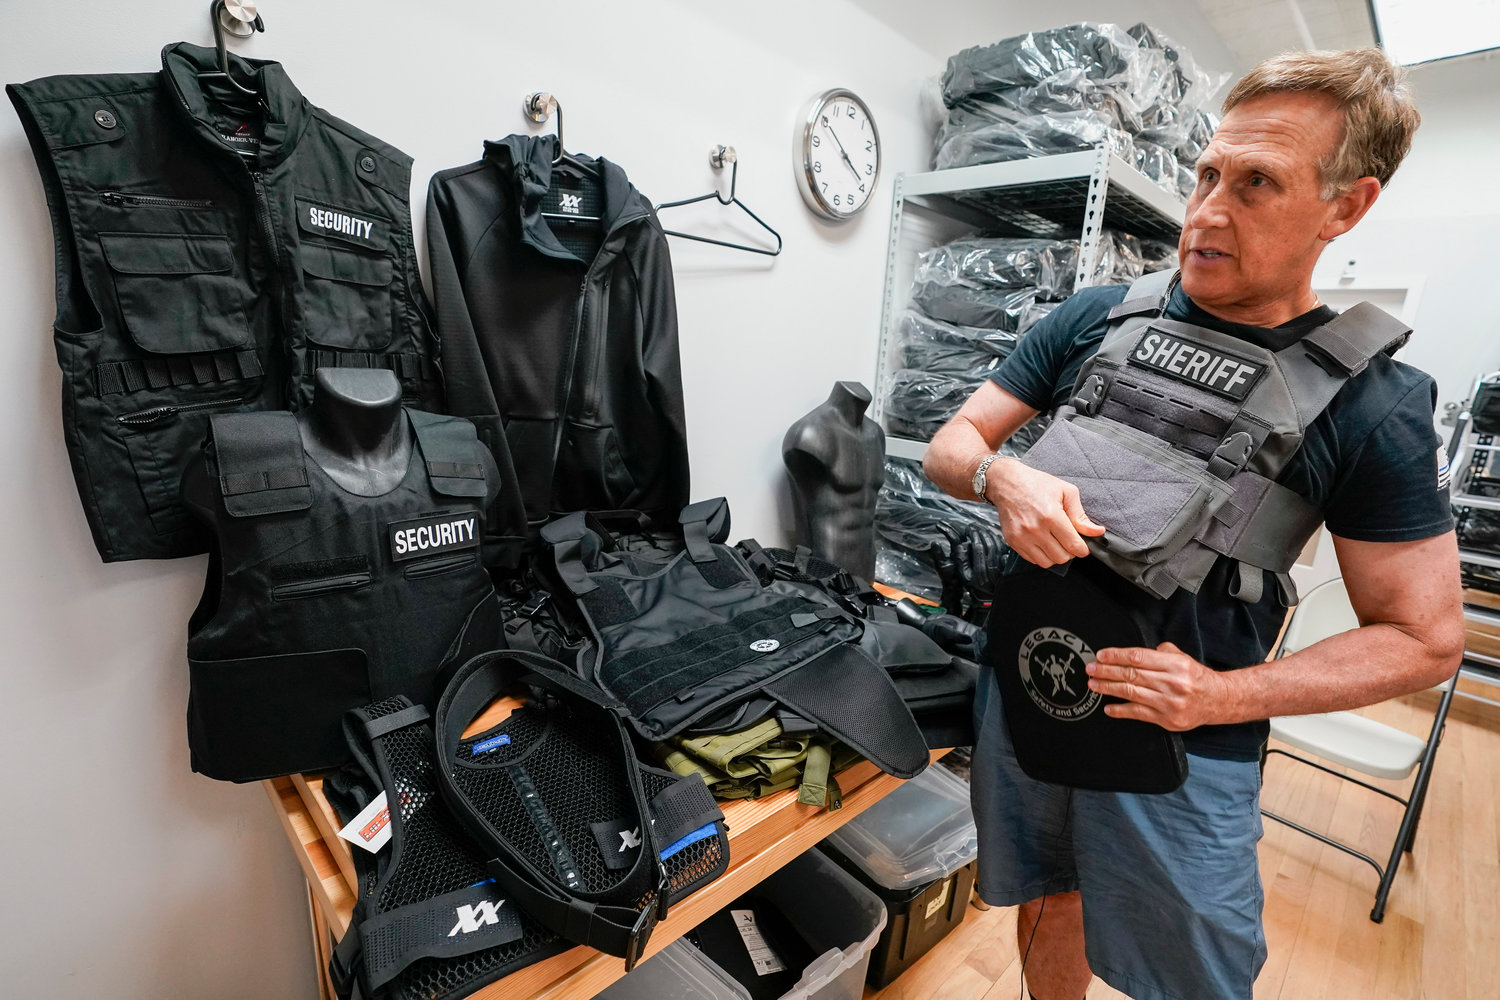 Brad Pedell, a founder of 221B Tactical, demonstrates how a Level 3 plate and plate carrier are used during an interview with The Associated Press recently.